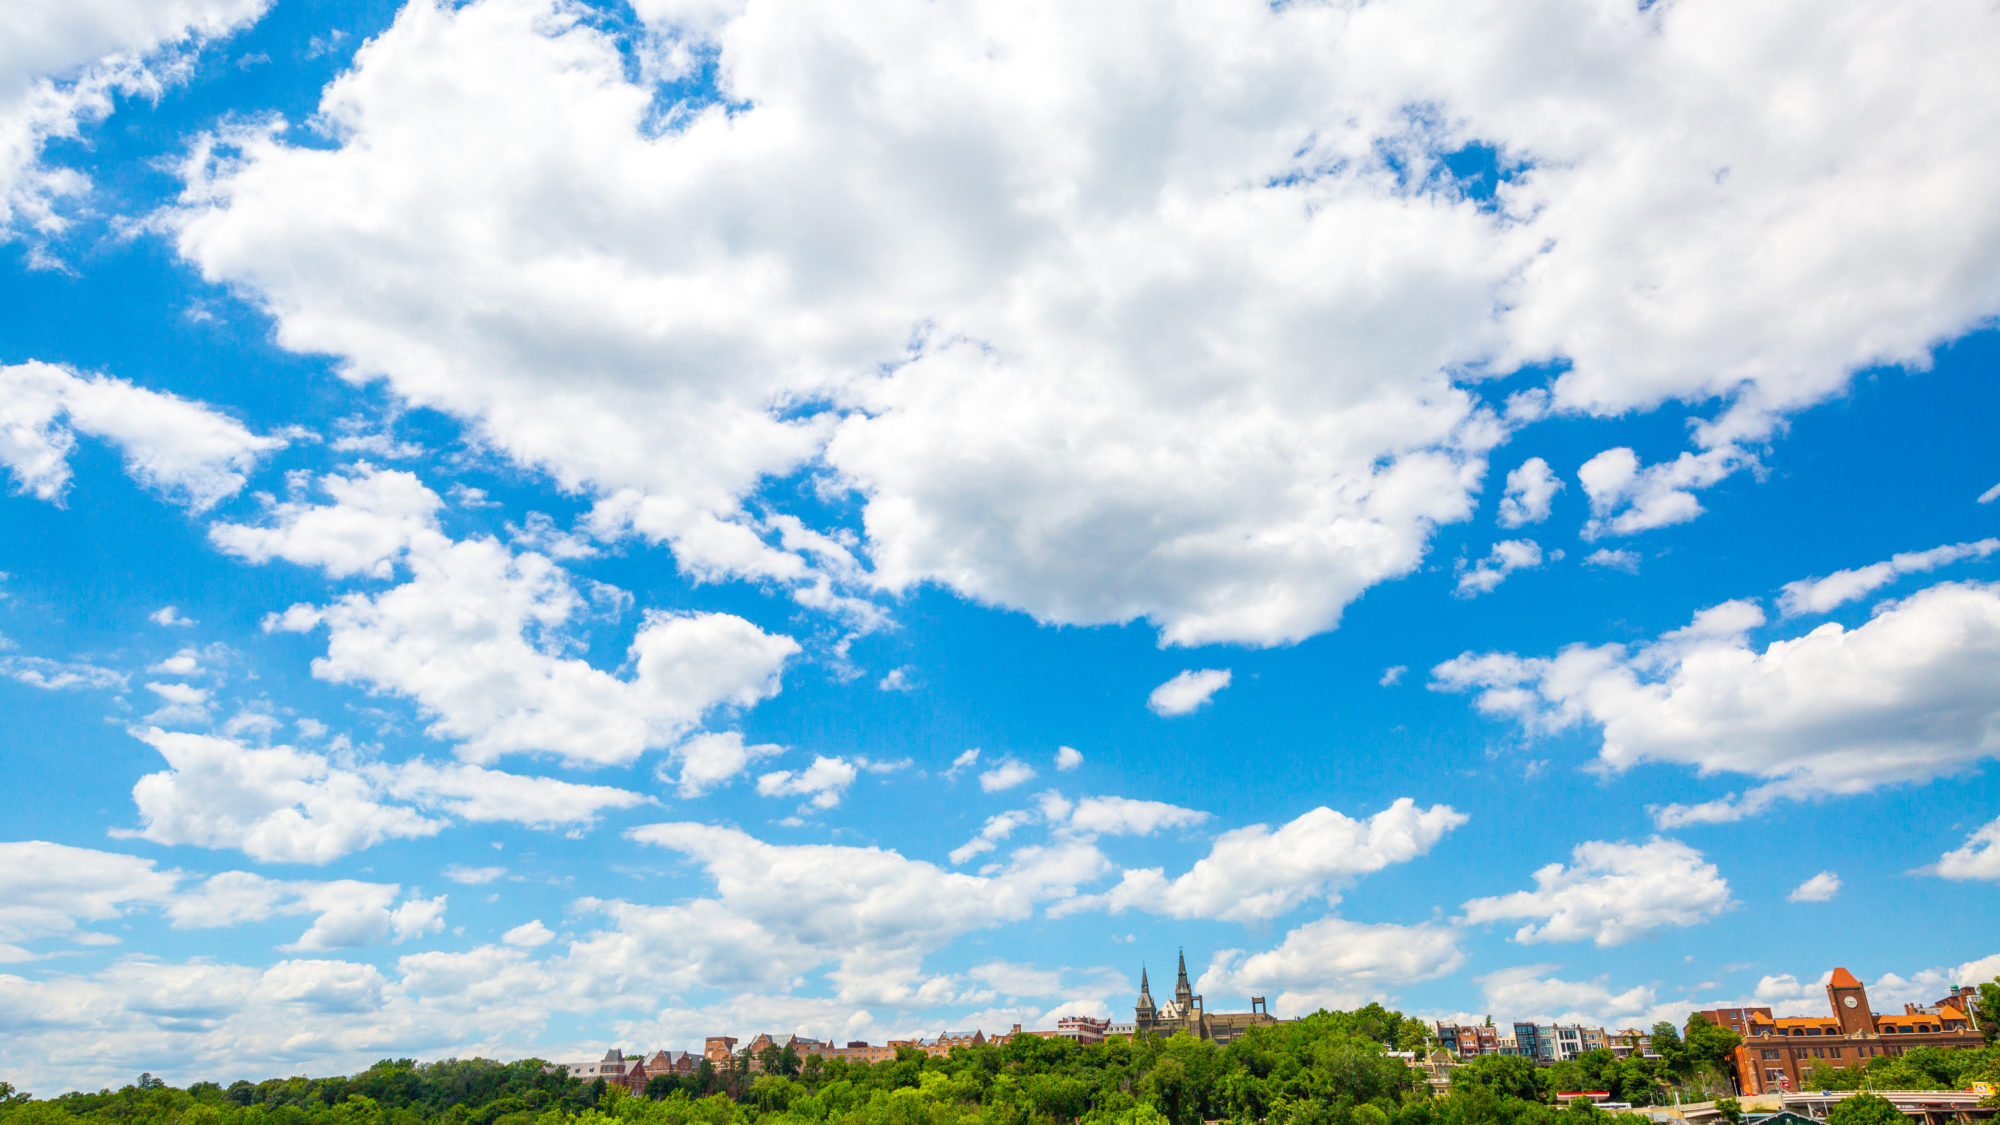 The Georgetown University campus outlines the bottom half of the photo, and is framed by a large, blue sky.